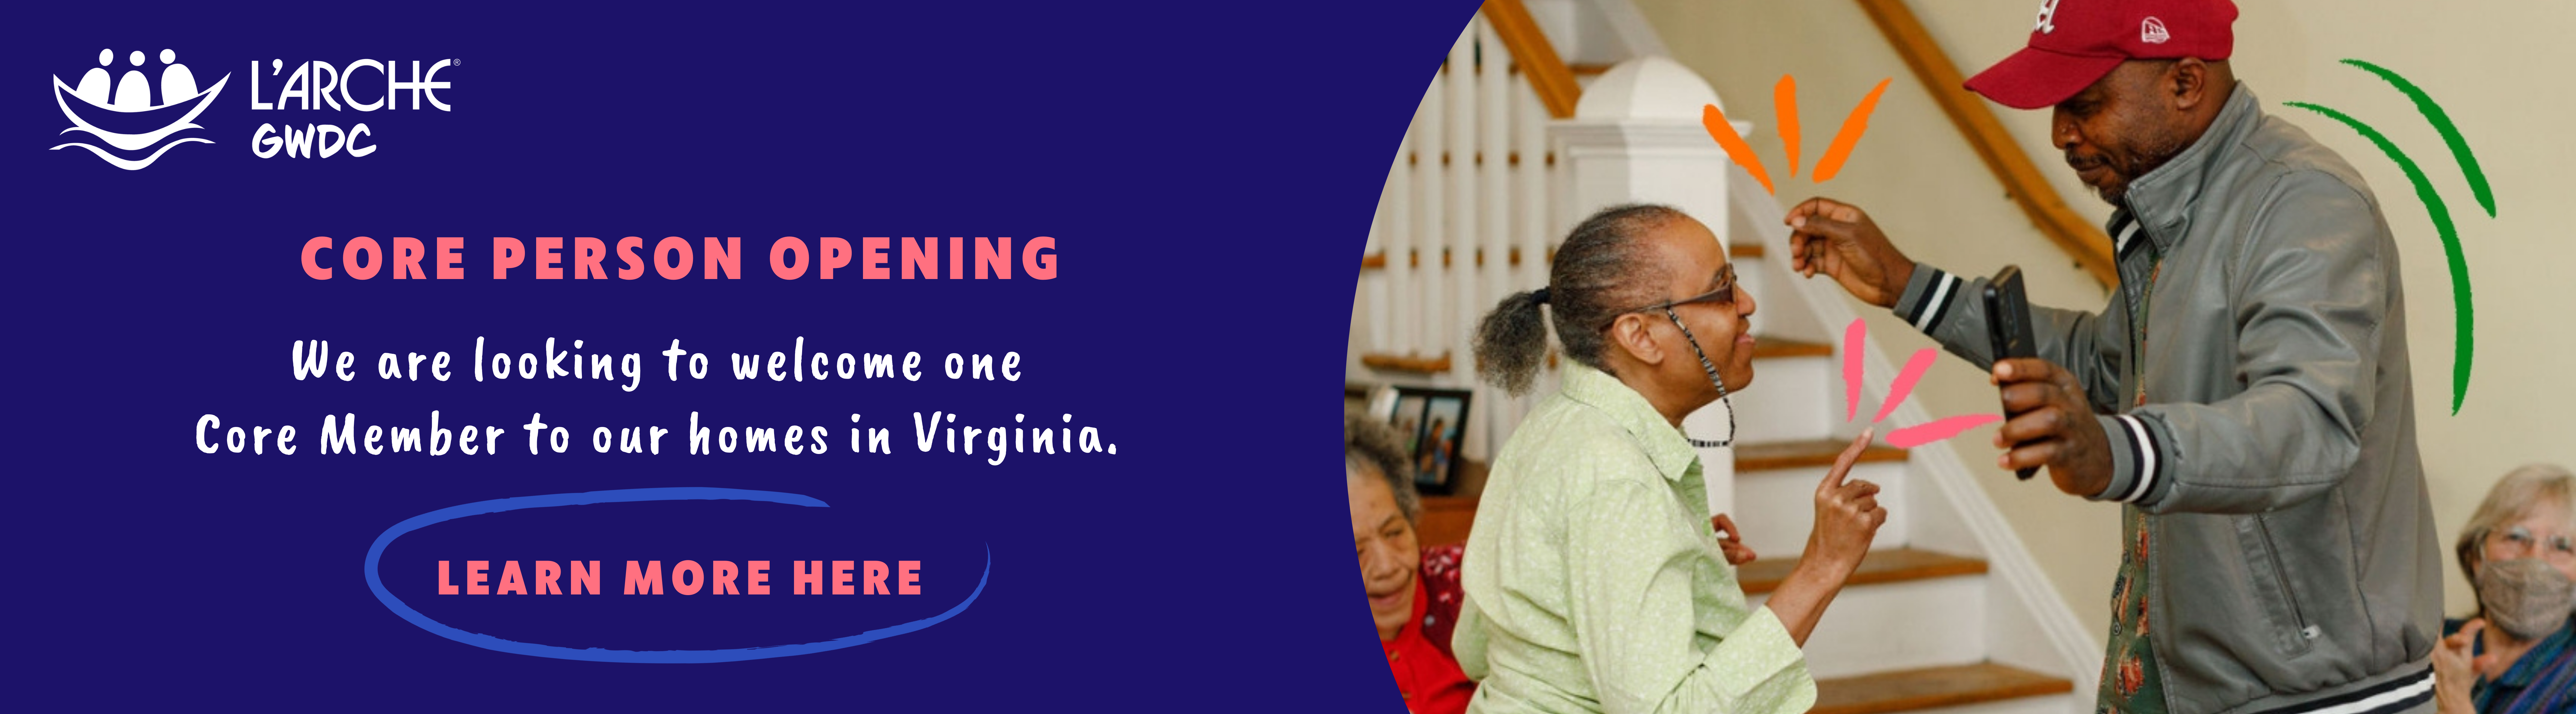 Core Person Opening. We are looking to welcome one Core Member to our homes in Virginia. Learn more by clicking on this banner.